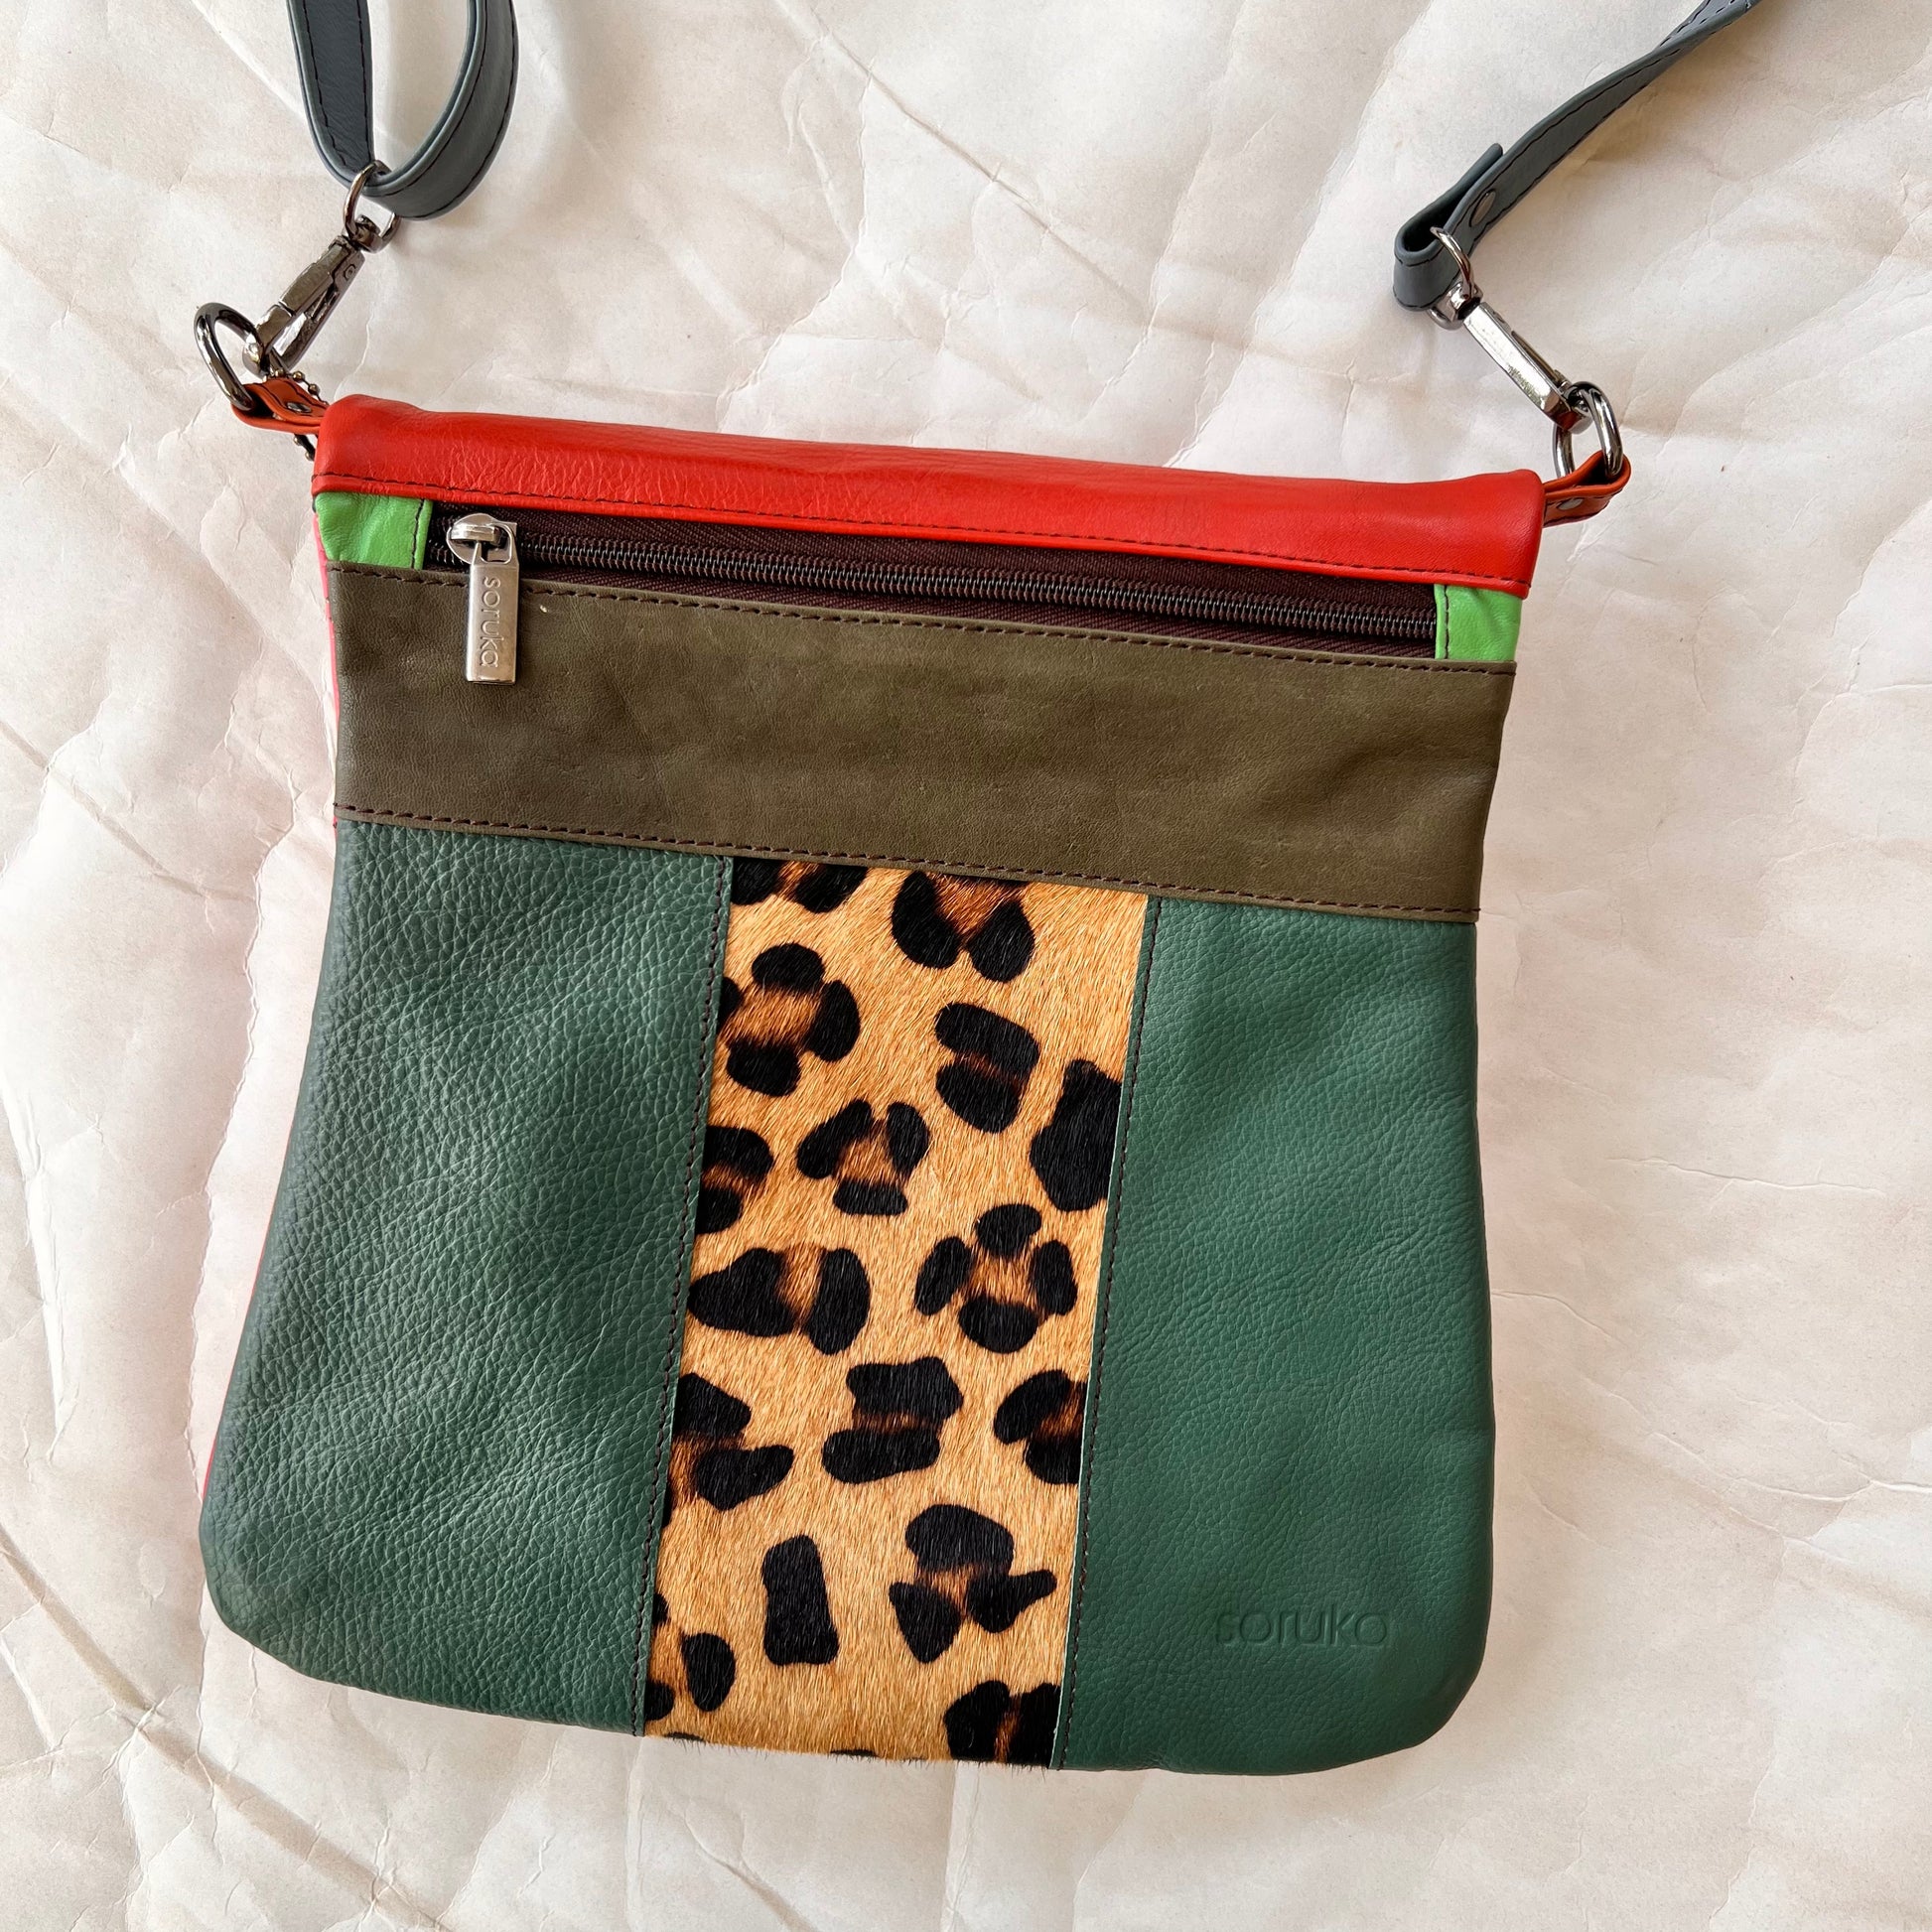 green greta bag with animal print block in the center with olive stripe and zipper across the top.